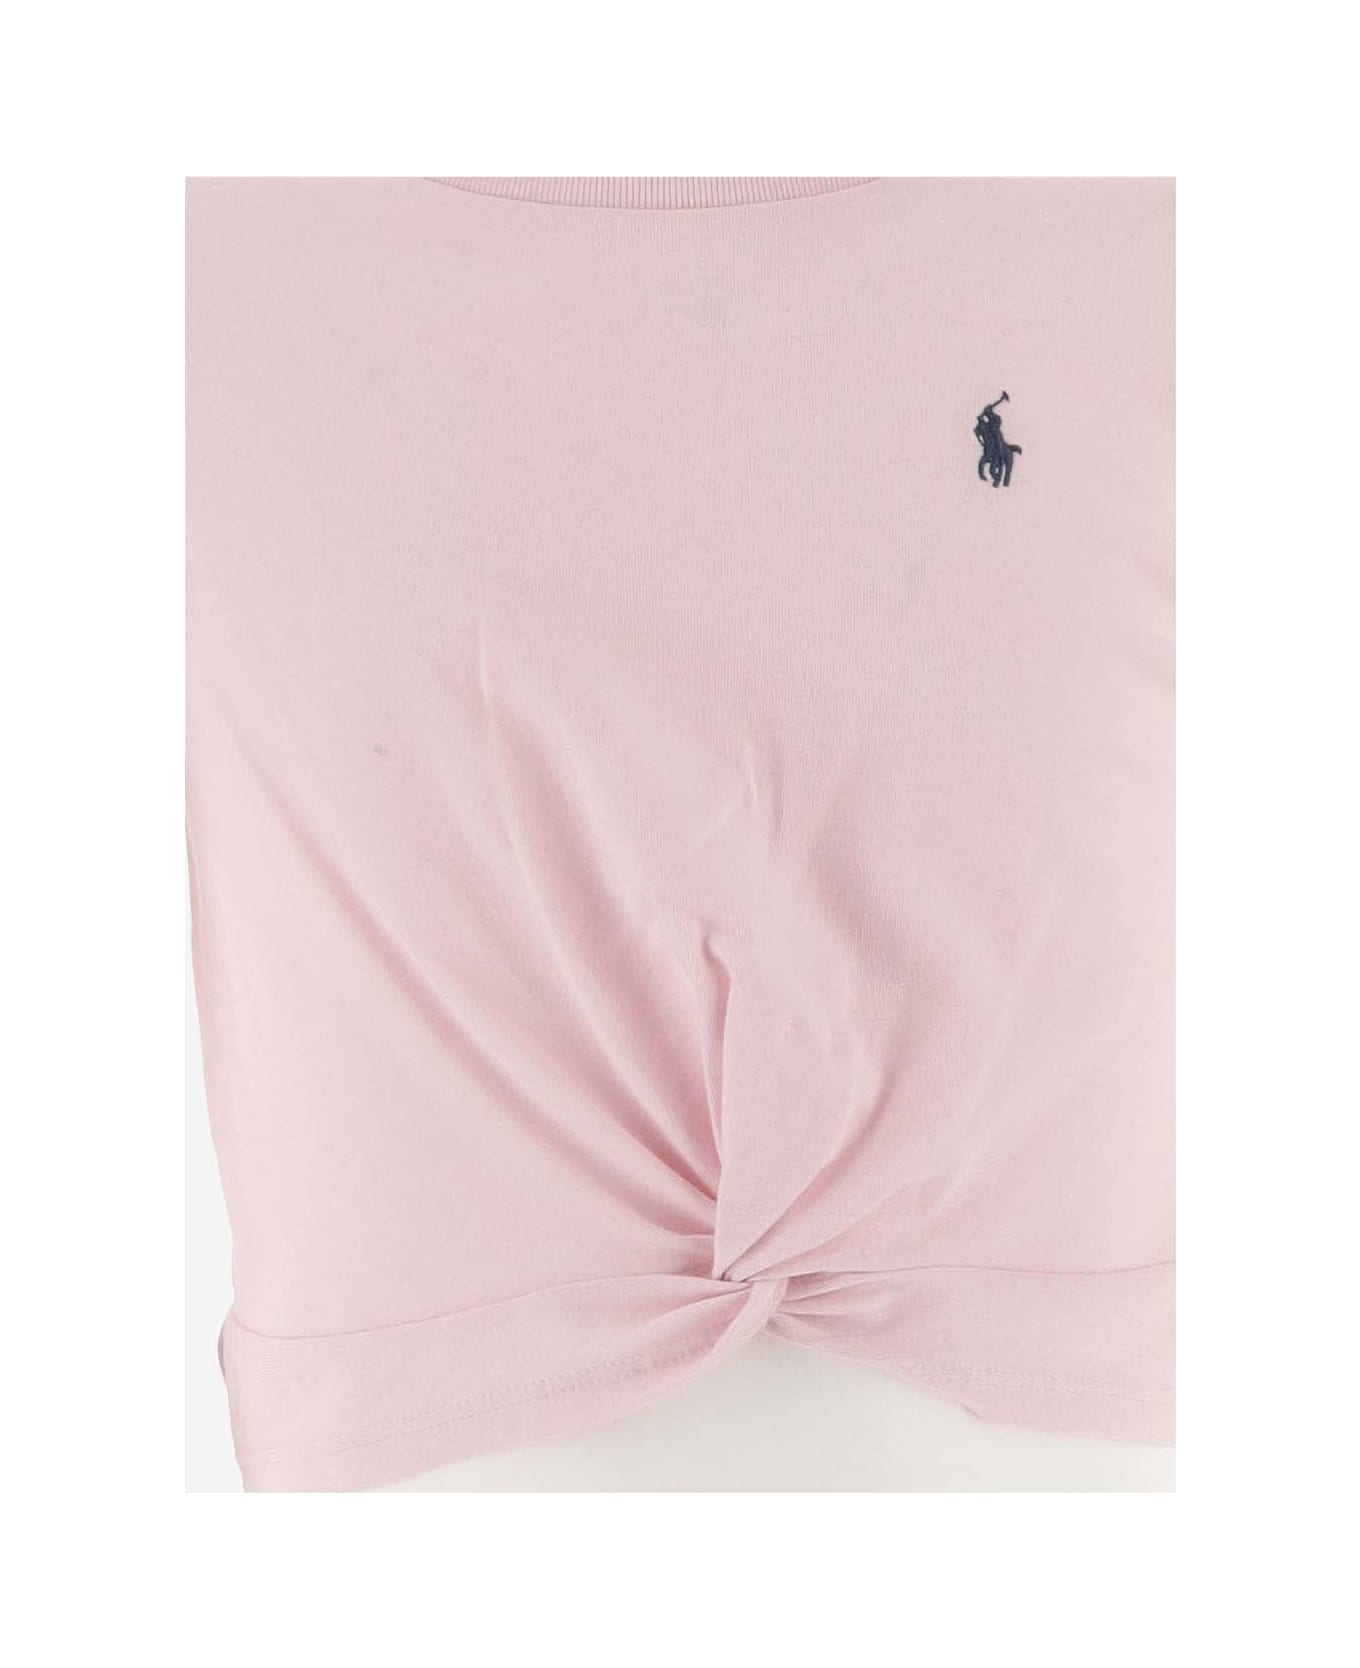 Polo Ralph Lauren Cotton Crop T-shirt With Logo - Pink Tシャツ＆ポロシャツ